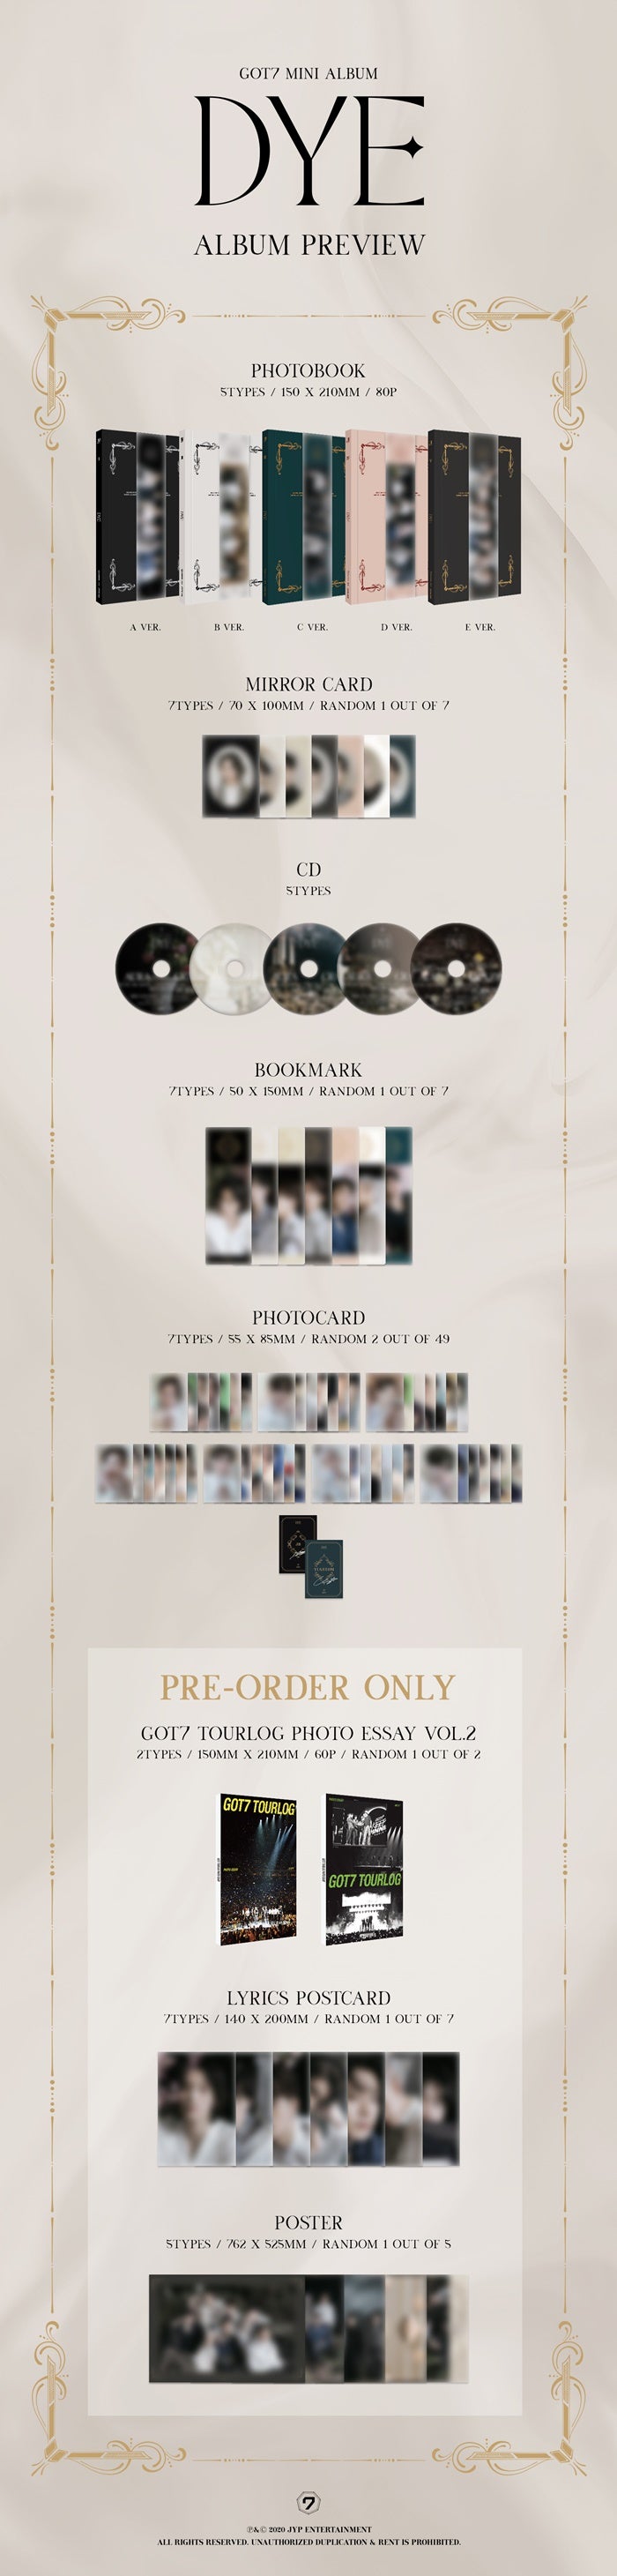 1 CD
1 Photo Book (80 pages)
1 Mirrorcard
2 Photo Cards
1 Bookmark